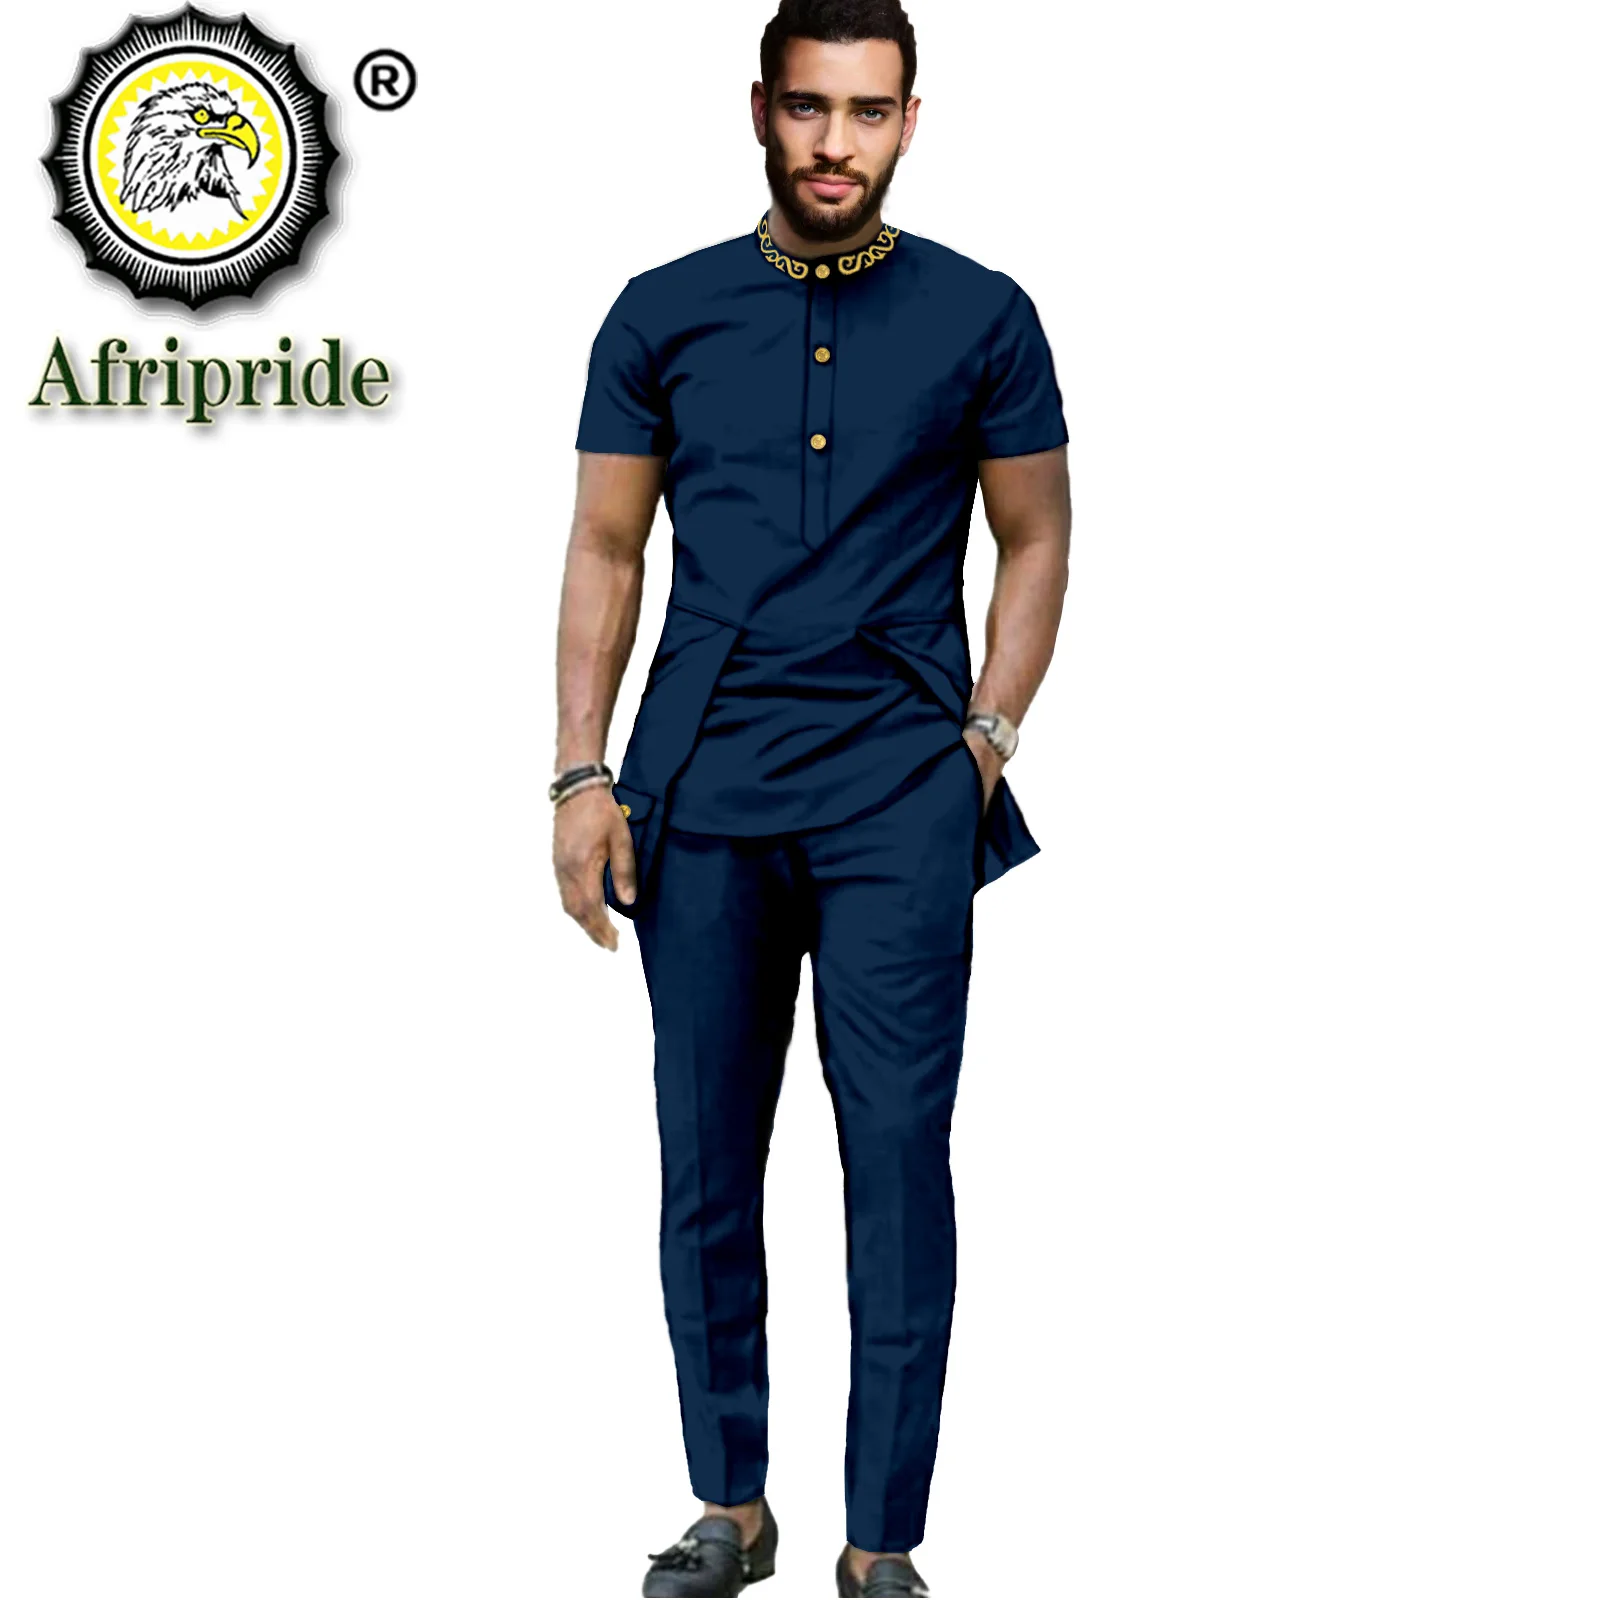 African Clothes for Men Embroidery Short Sleeve Shirt and Pant 2 Piece Set Dashiki Outfit Plus Size Tracksuit Blouse S2116011 bazin riche african suits for men tribal tracksuit plus size short sleeve embroidery blouse and pants 2 piece set a2216075